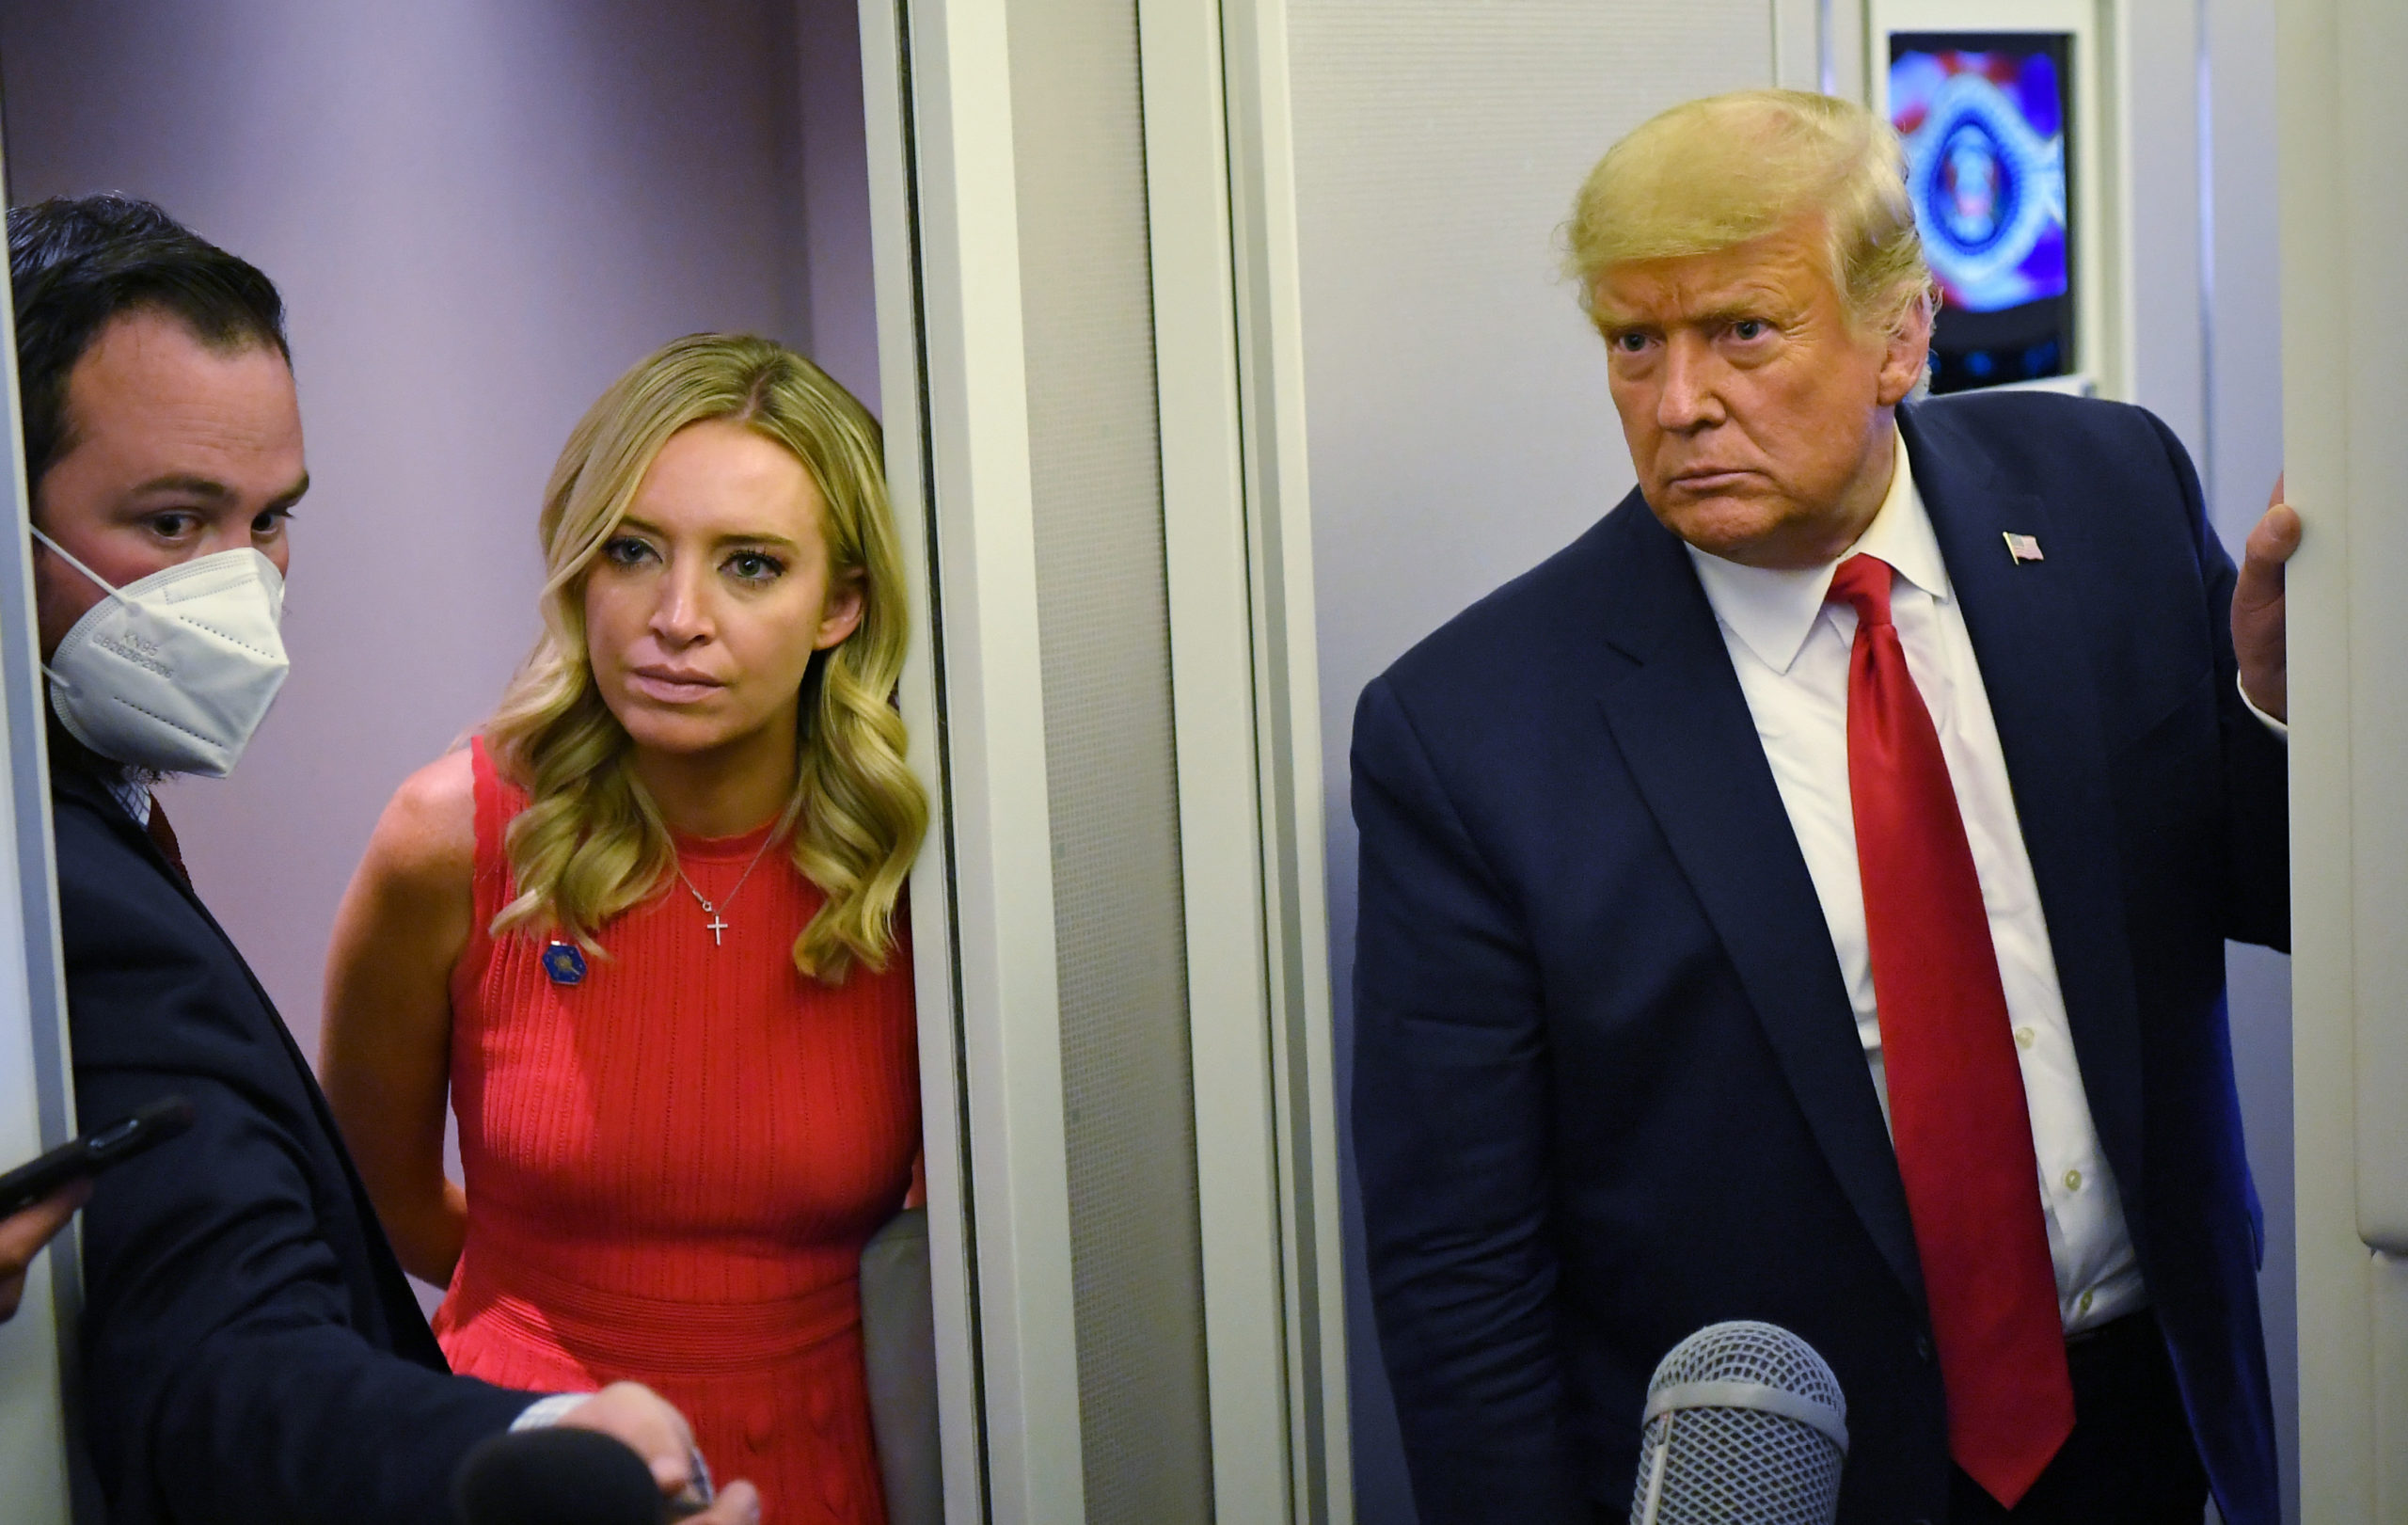 US President Donald Trump, flanked by White House Press Secretary Kayleigh McEnany (L), speaks reporters while in flight aboard Air Force One shortly before landing at Andrews Air Force Base in Maryland on October 19, 2020. (Photo by MANDEL NGAN/AFP via Getty Images)